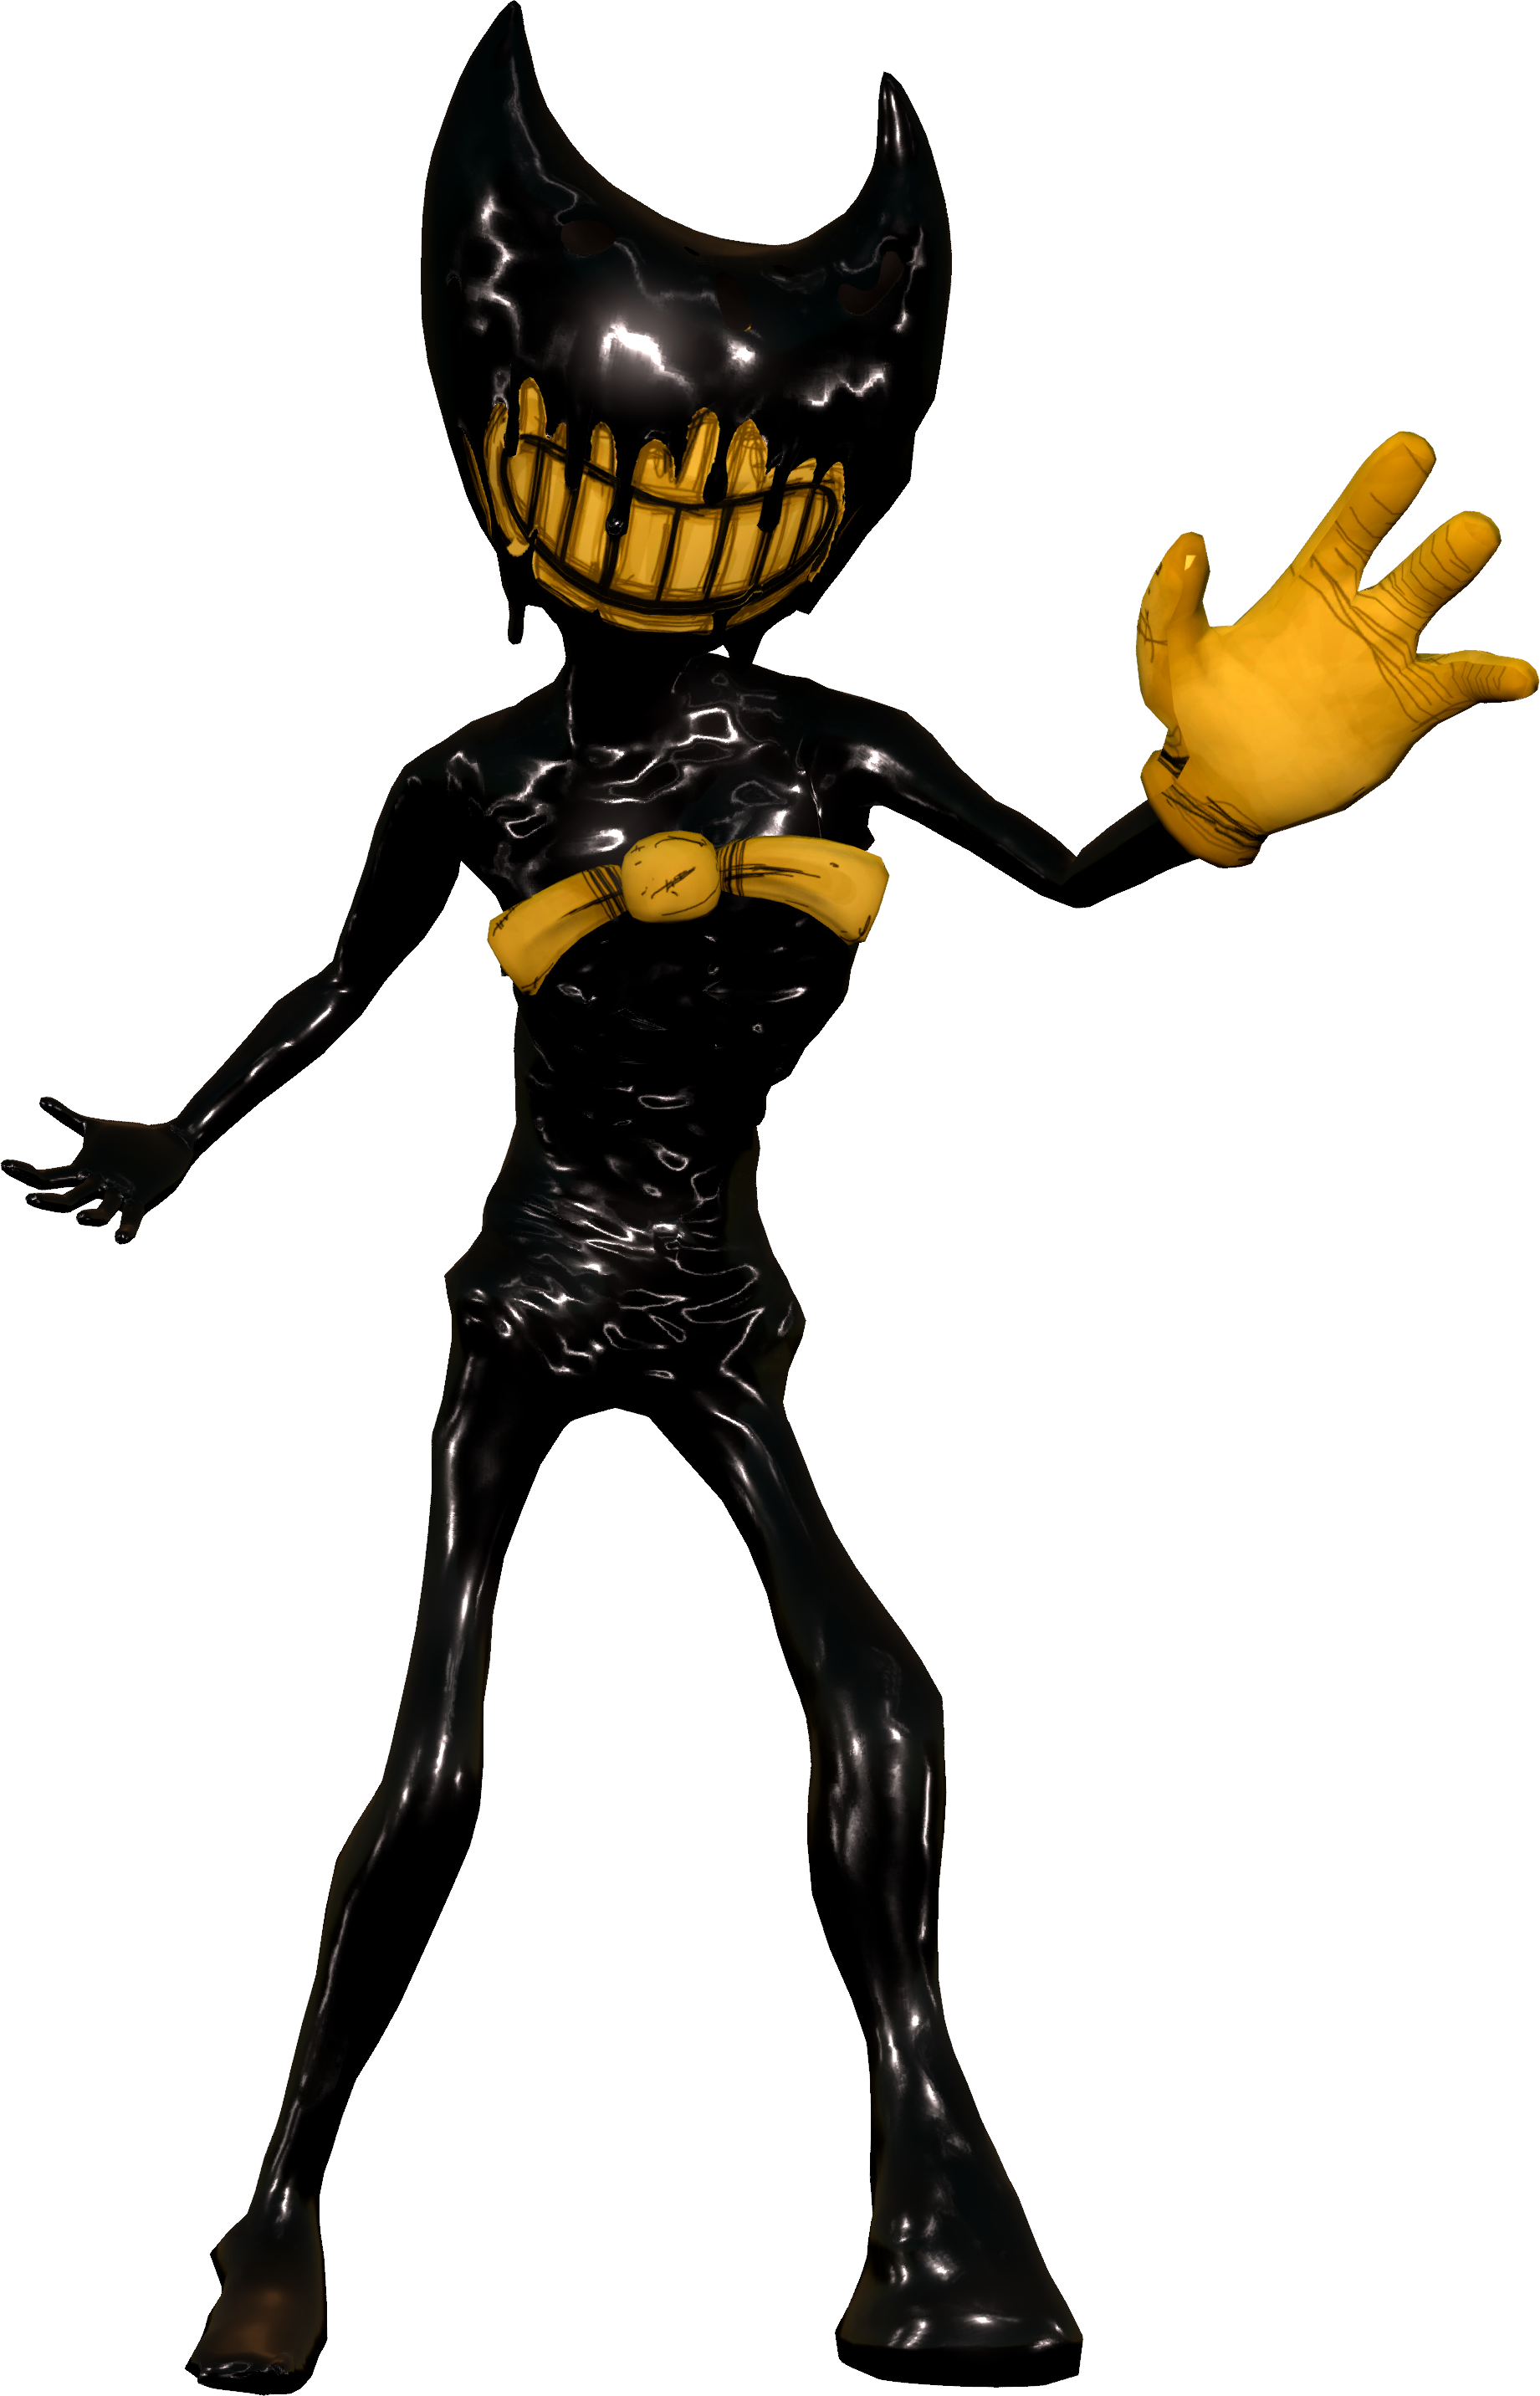 Why was Bendy evil?